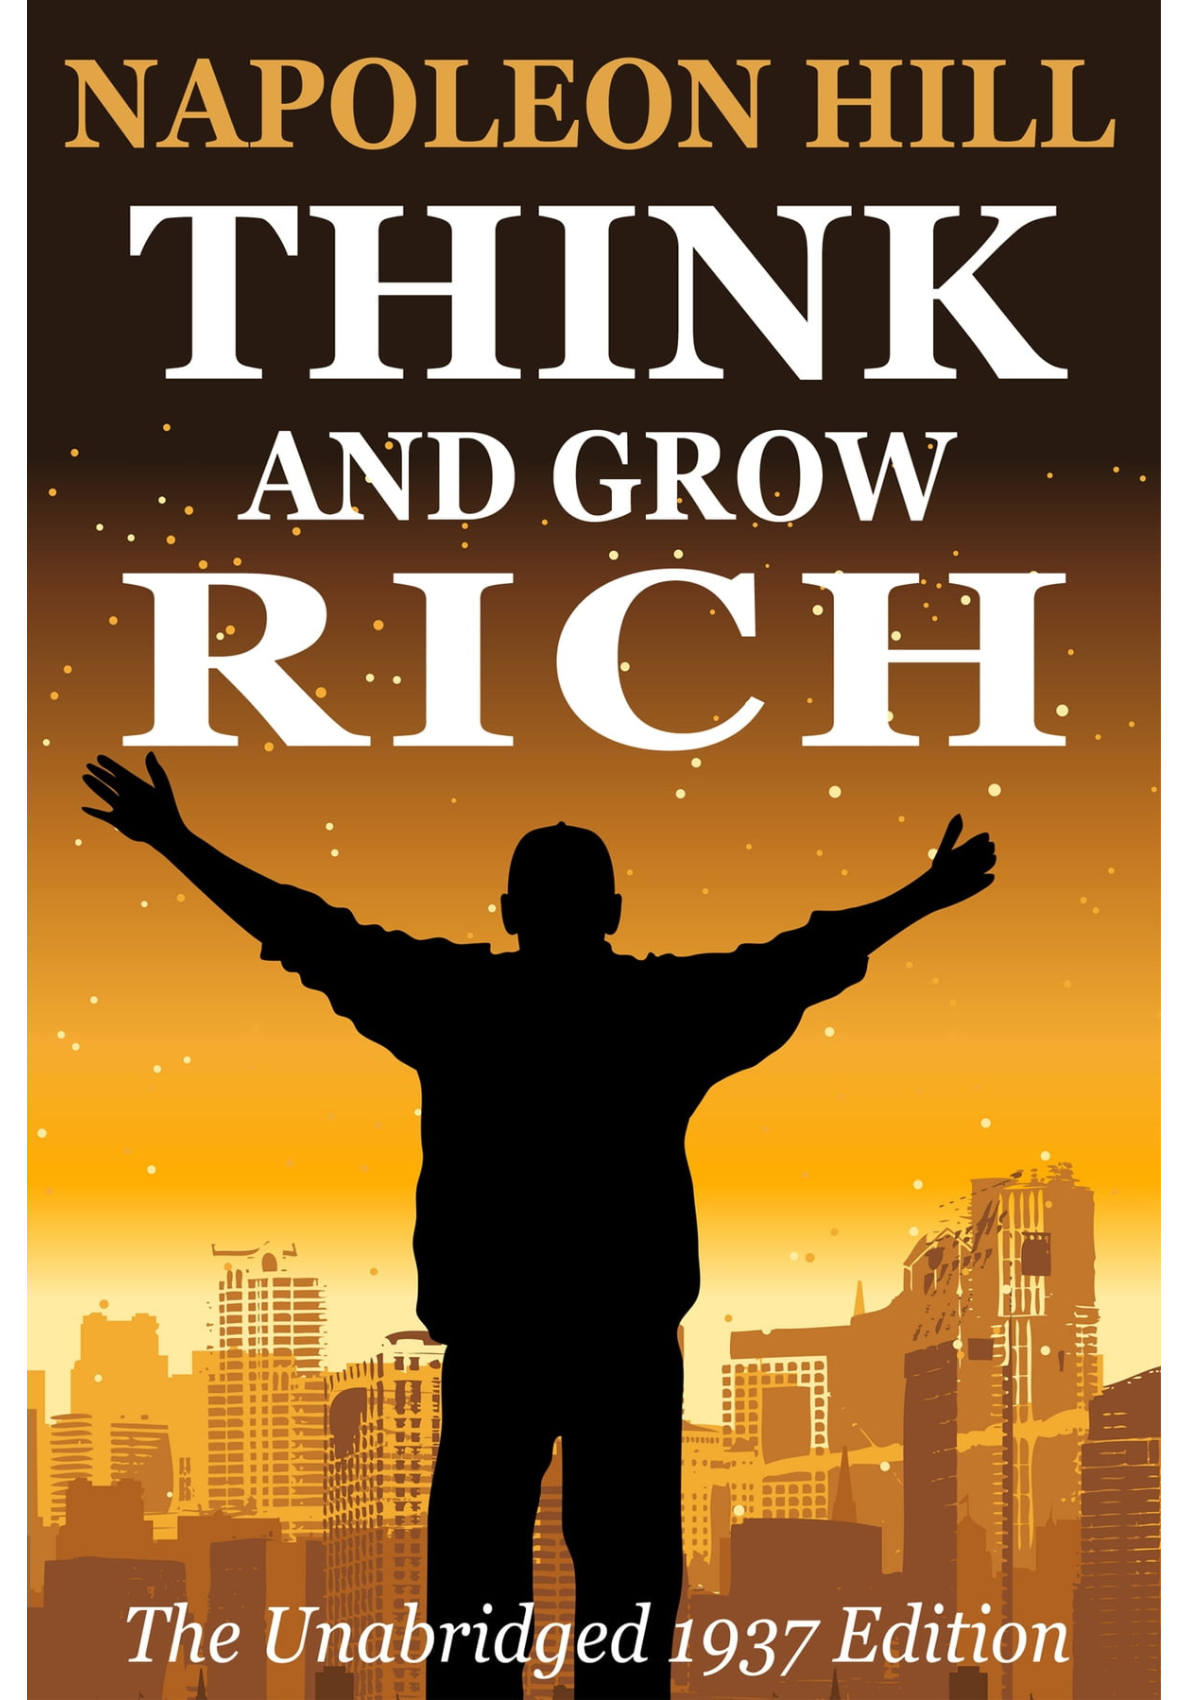 Download PDF of Think rich & Grow By Napoleon Hill - a-zpdf